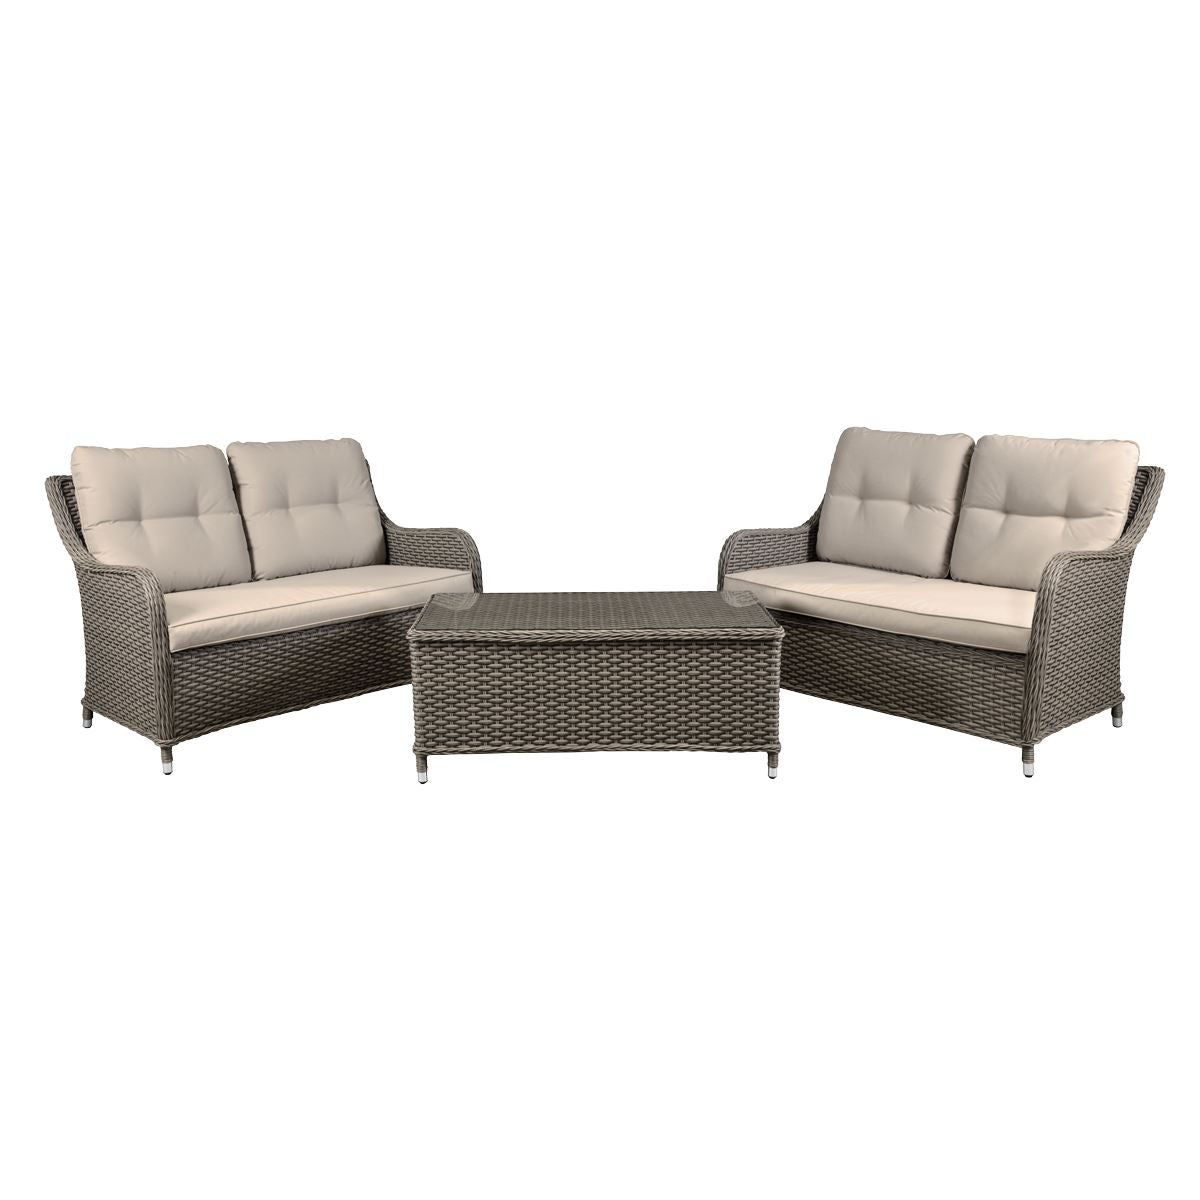 Dellonda Chester 3 Piece Outdoor Rattan Lounge Set with 2 x Double Seater Sofas, Brown